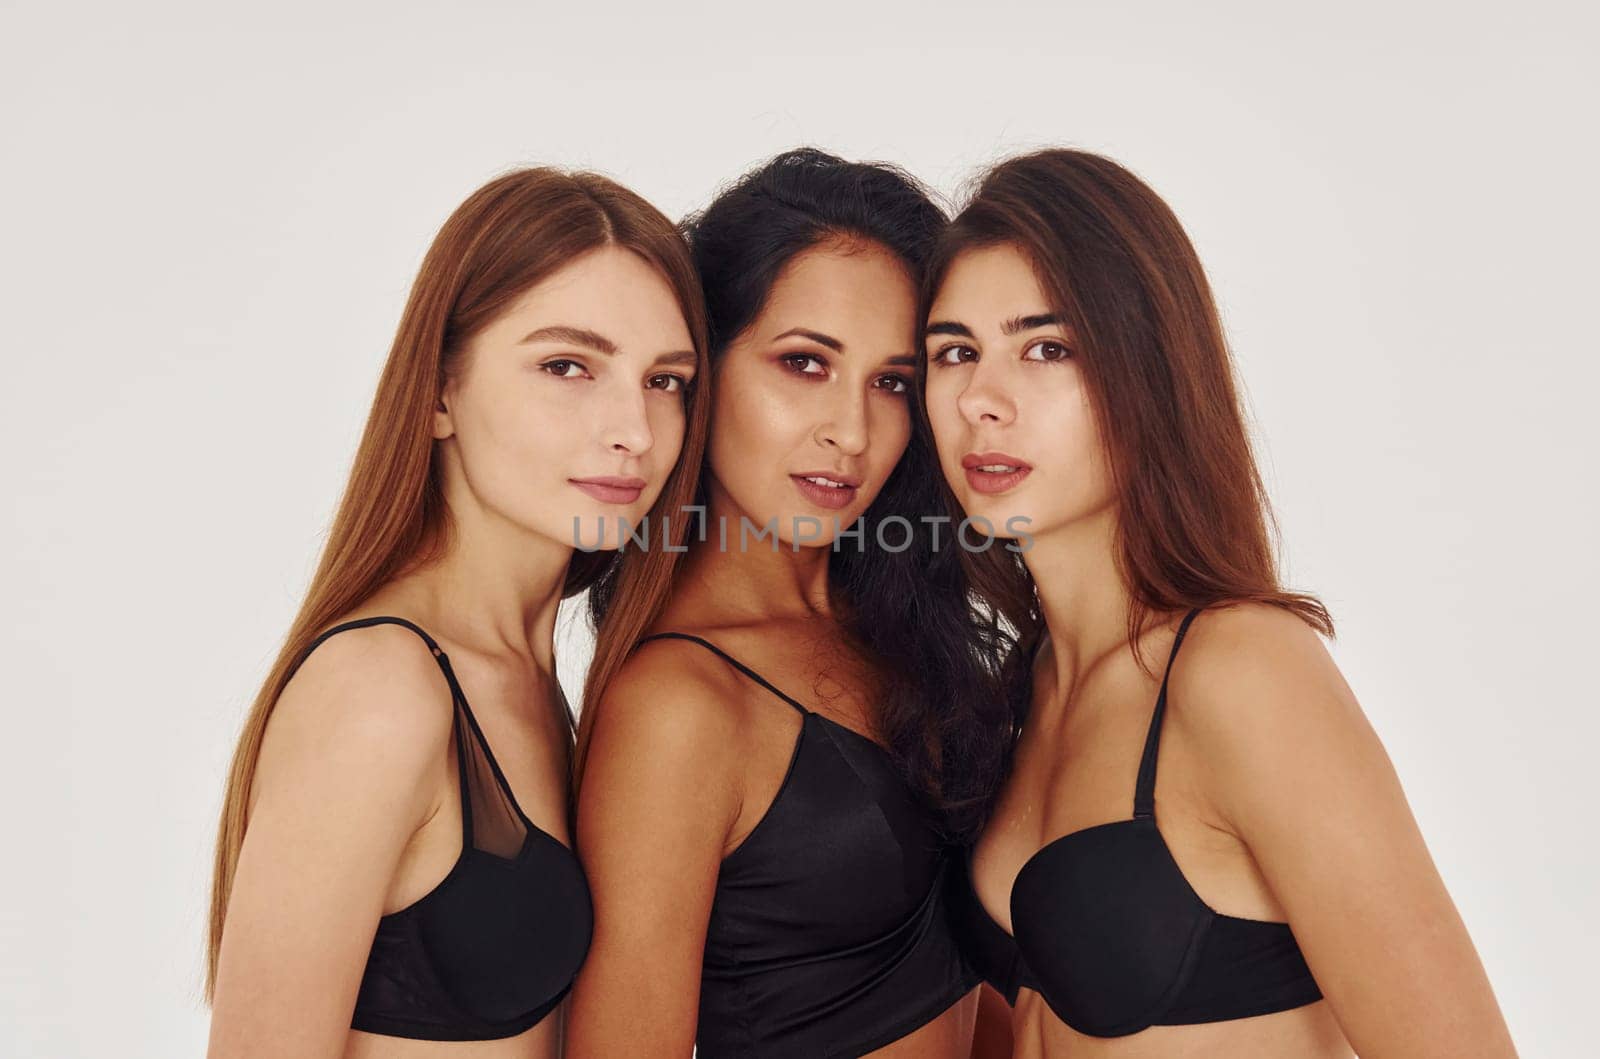 In black bra. Three young women in lingerie together indoors. White background.